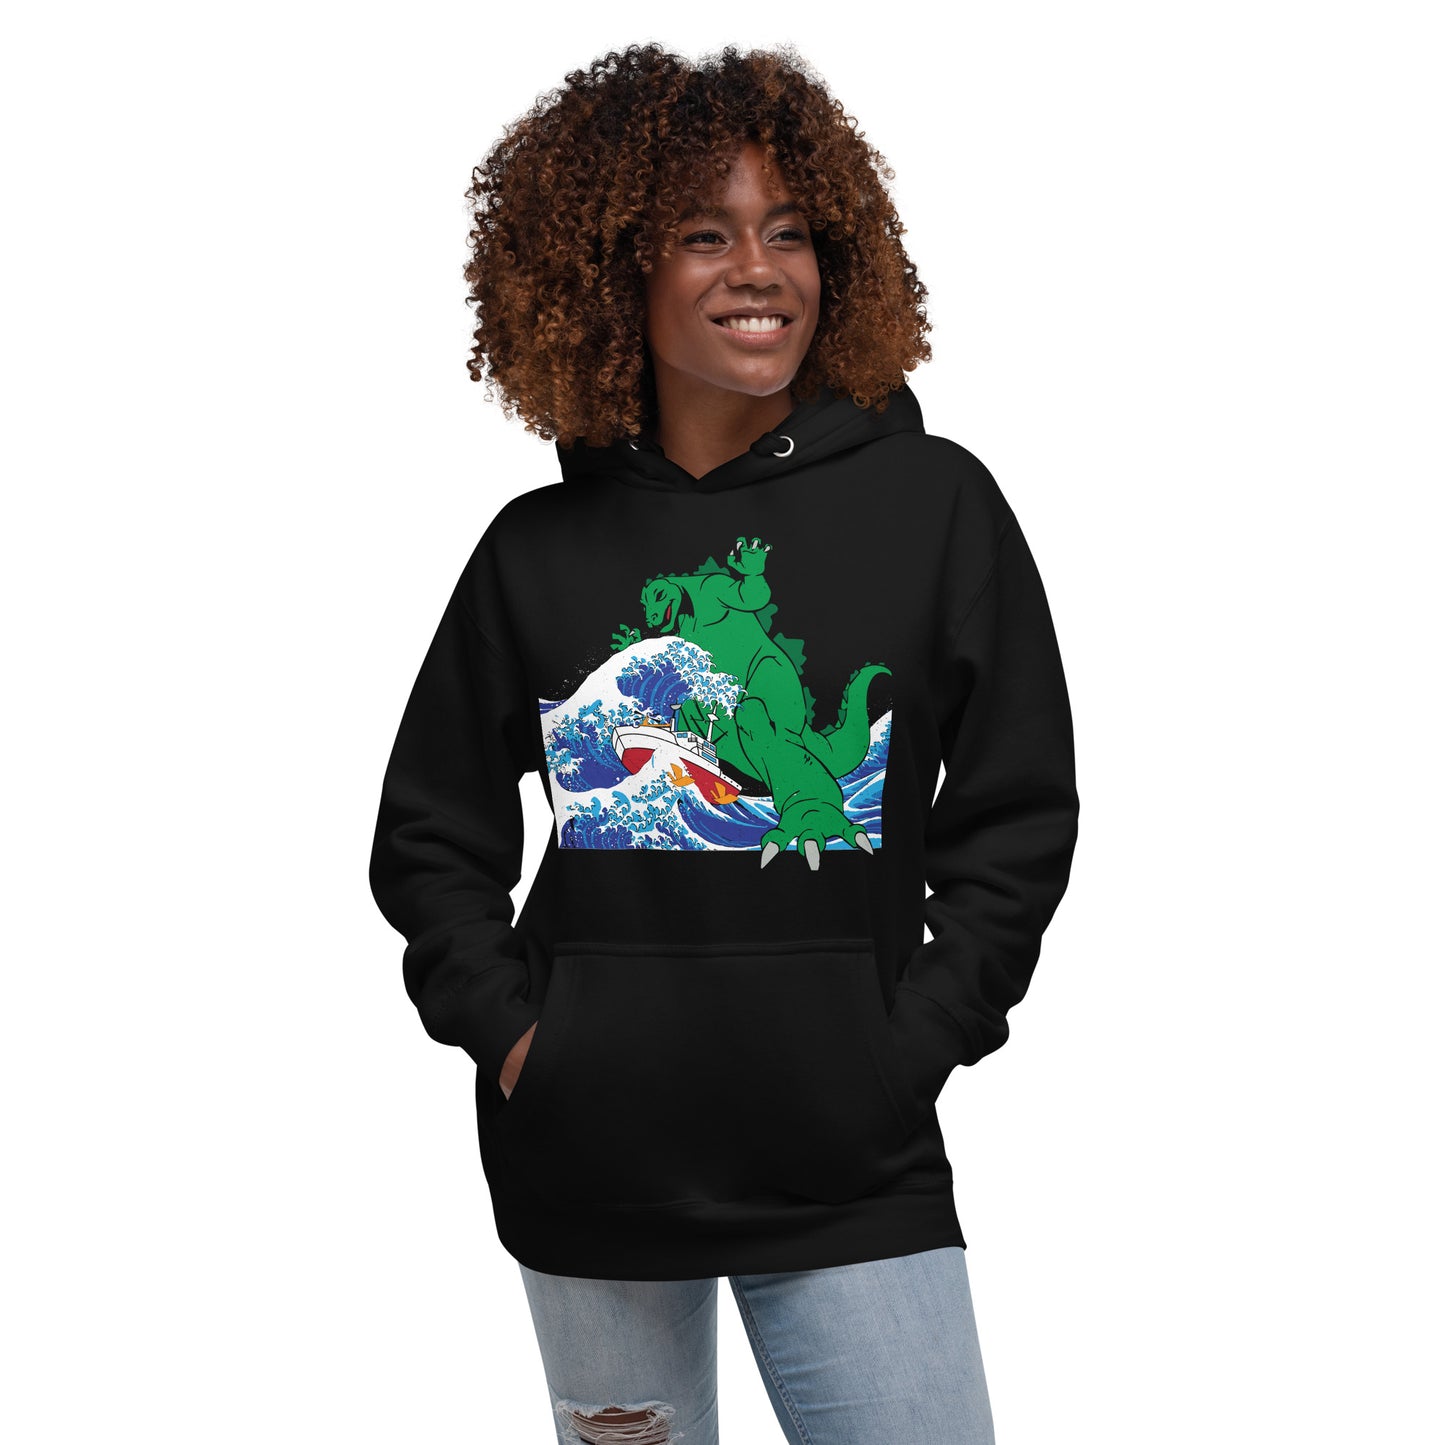 Calico in Trouble - Unisex Hoodie